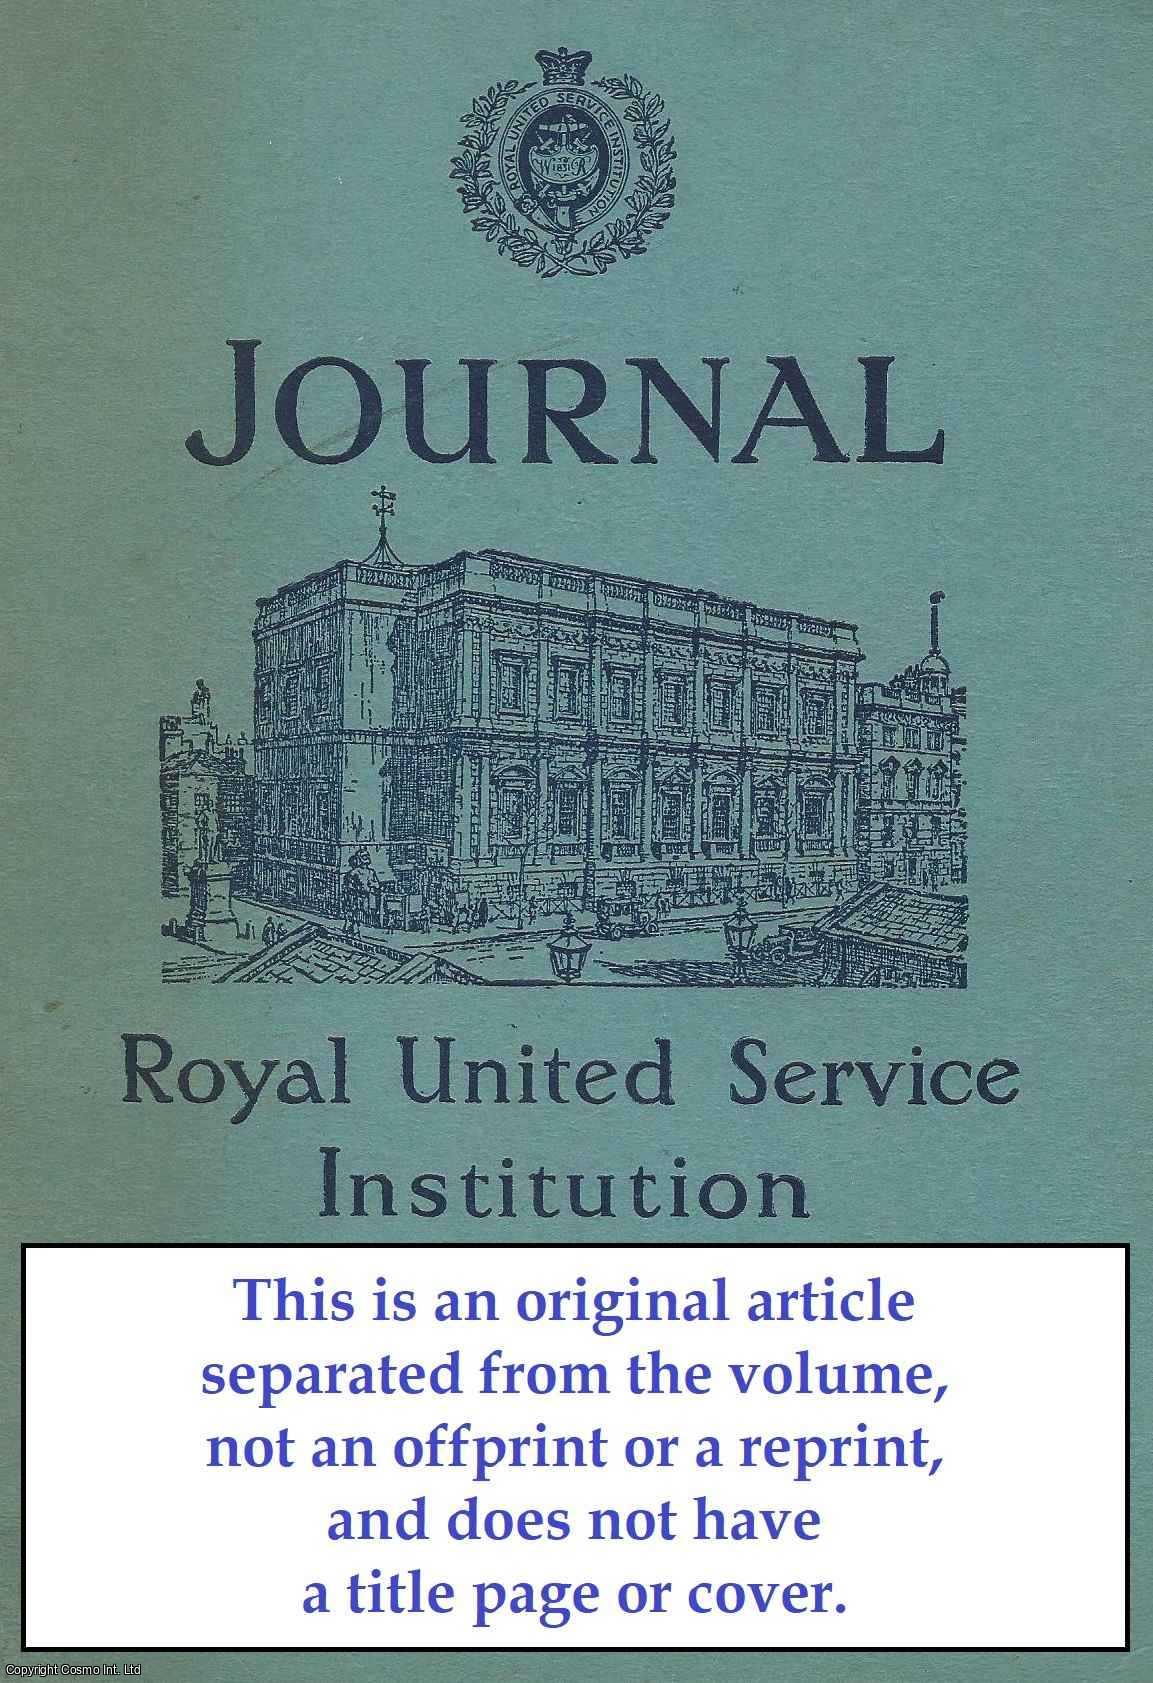 Dorothy Pickles - De Gaulle's France. An original article from The Royal United Service Institution Journal, 1966.